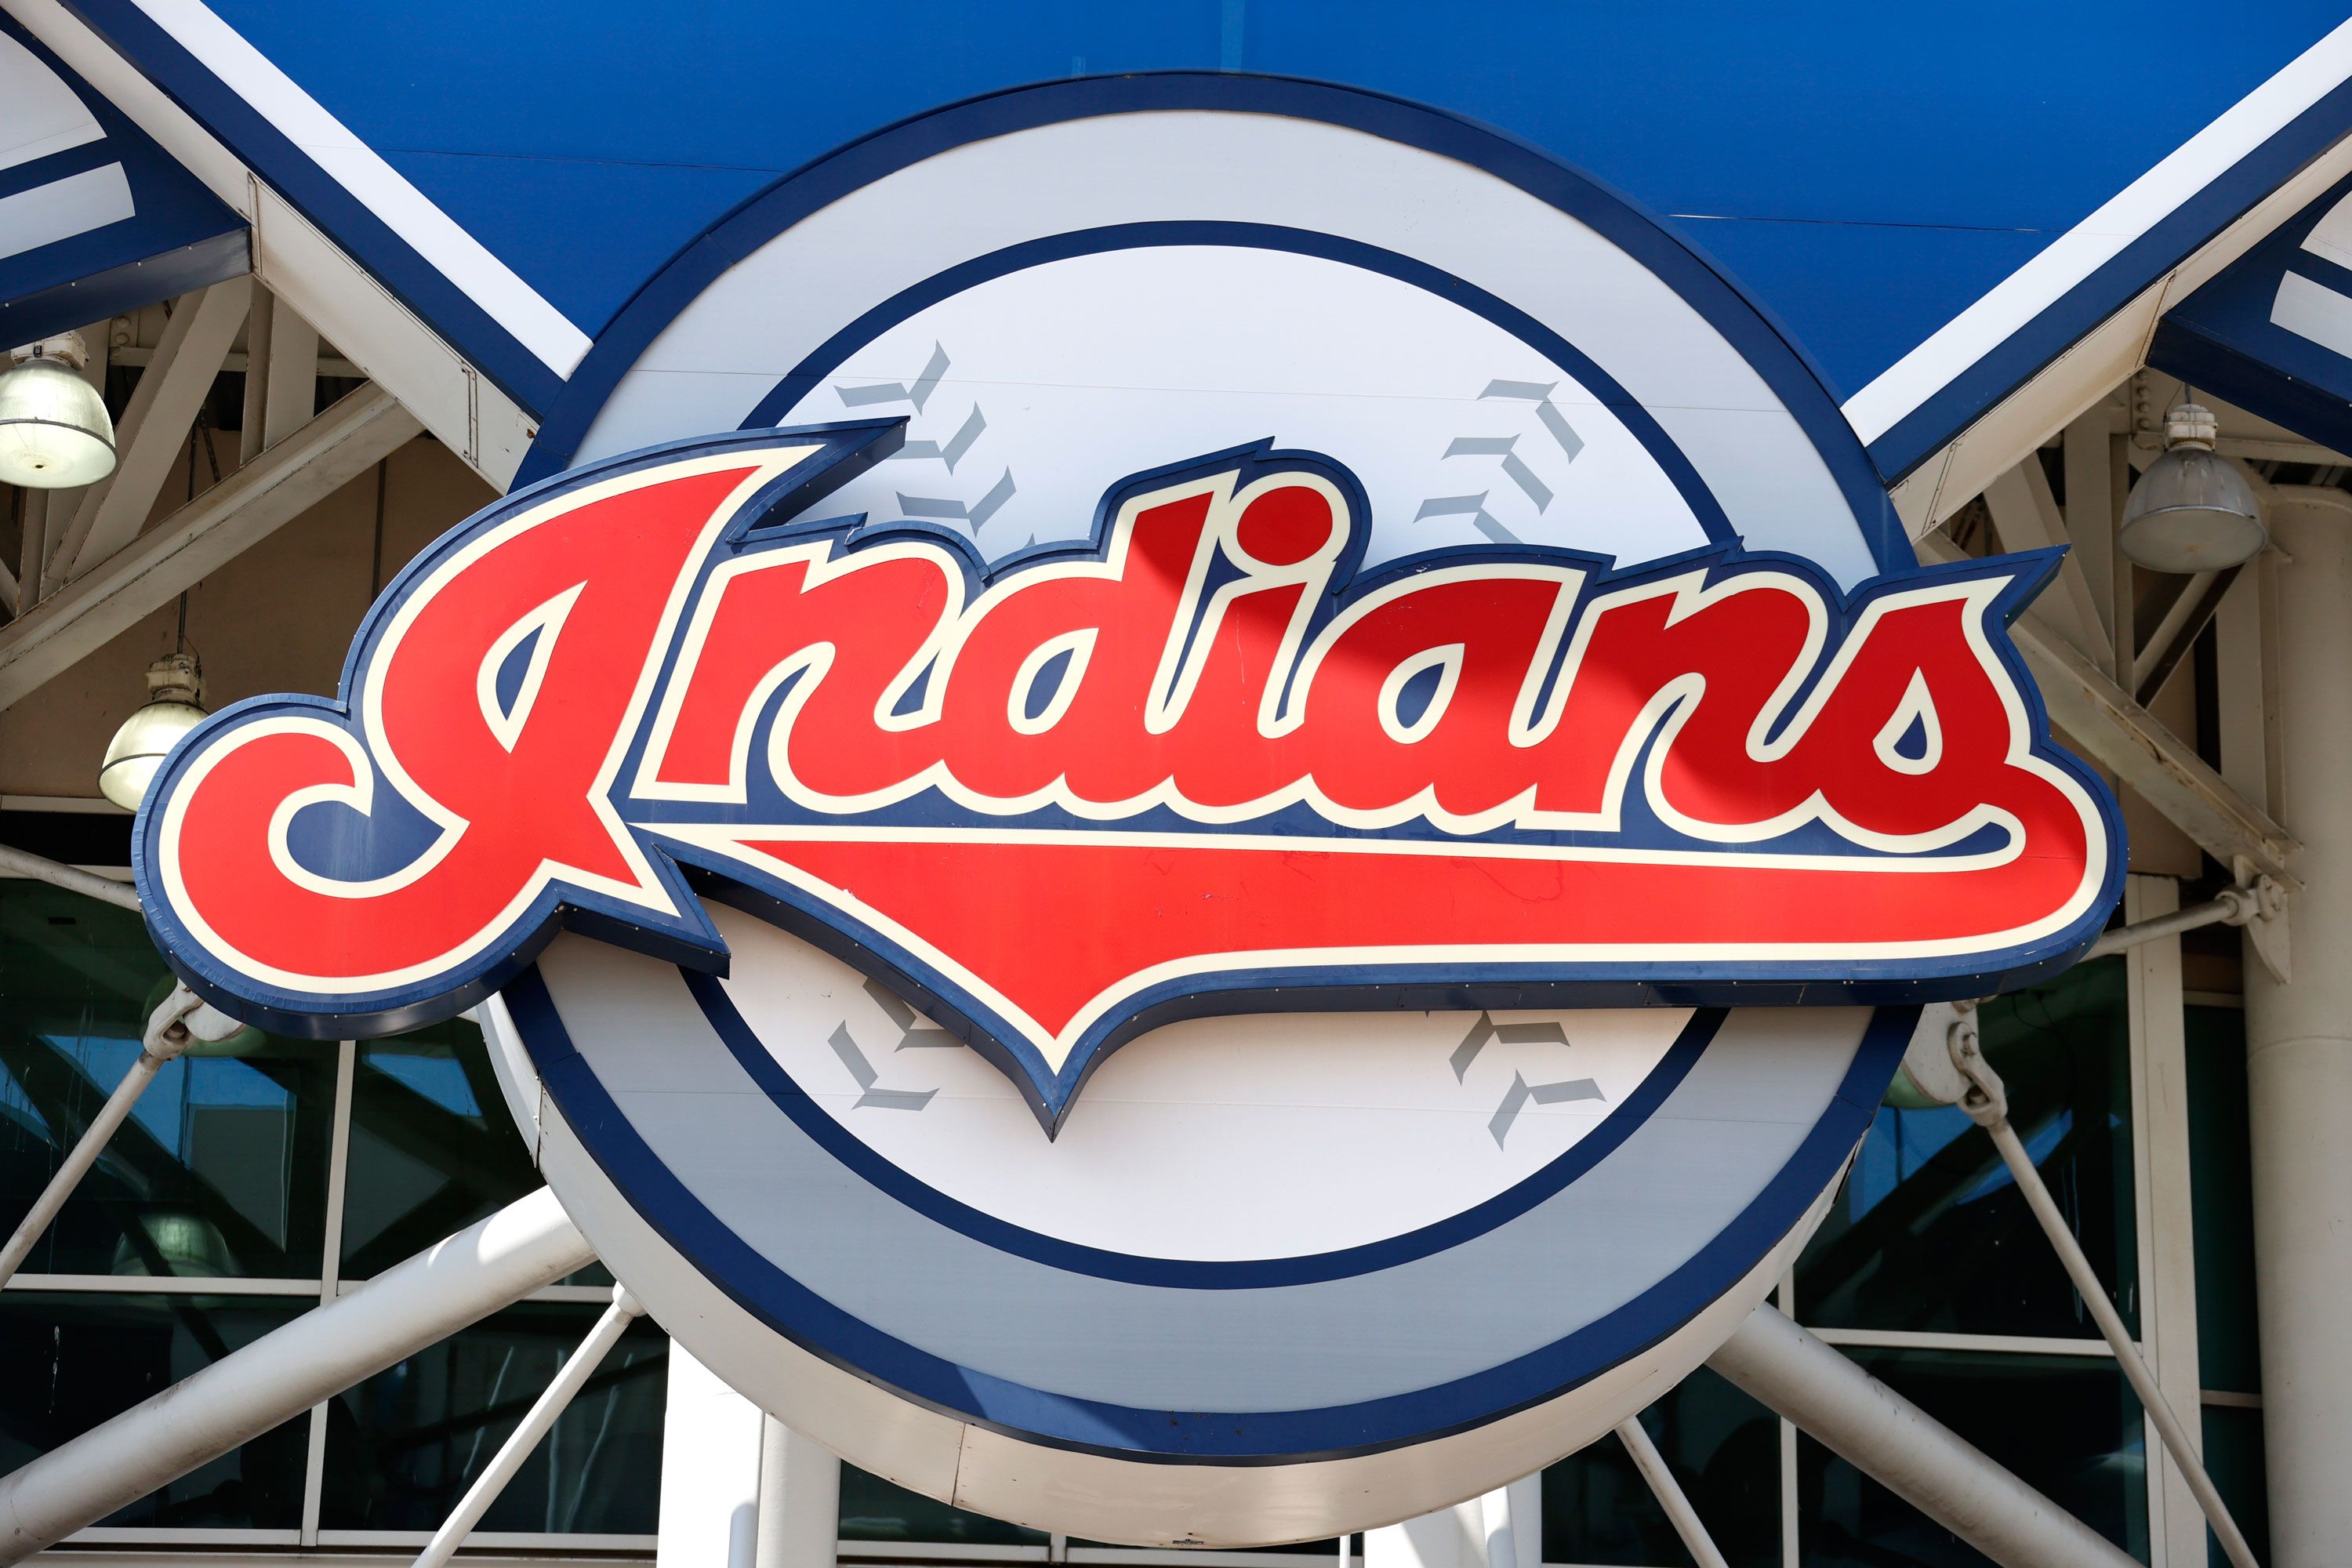 Cleveland Indians to remove Native American Chief Wahoo logo from